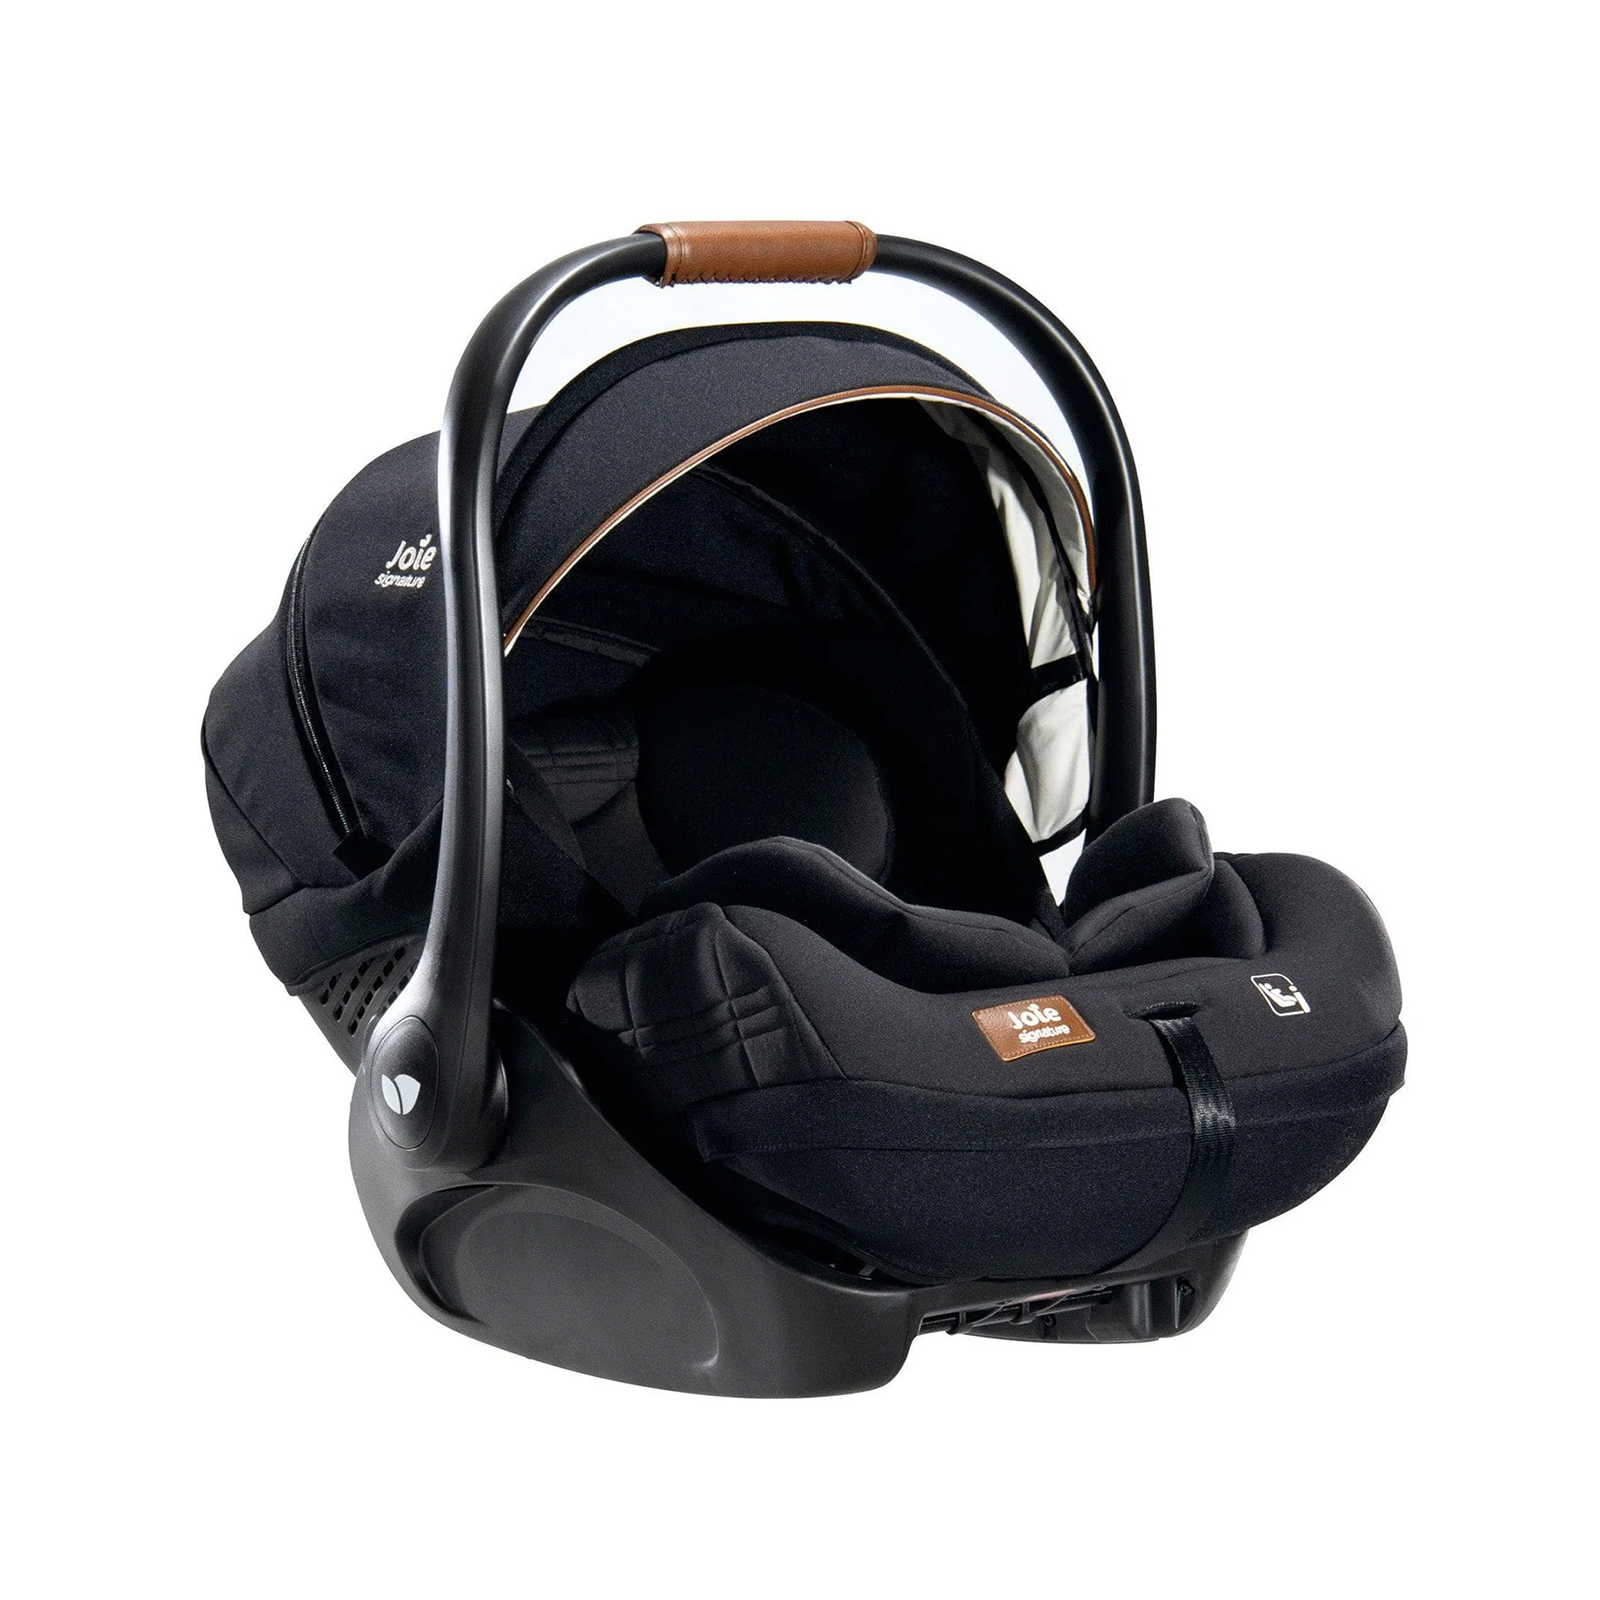 Joie i-Level Recline i-Size Group 0+ Infant Car Seat - Eclipse (Birth-15 Months)